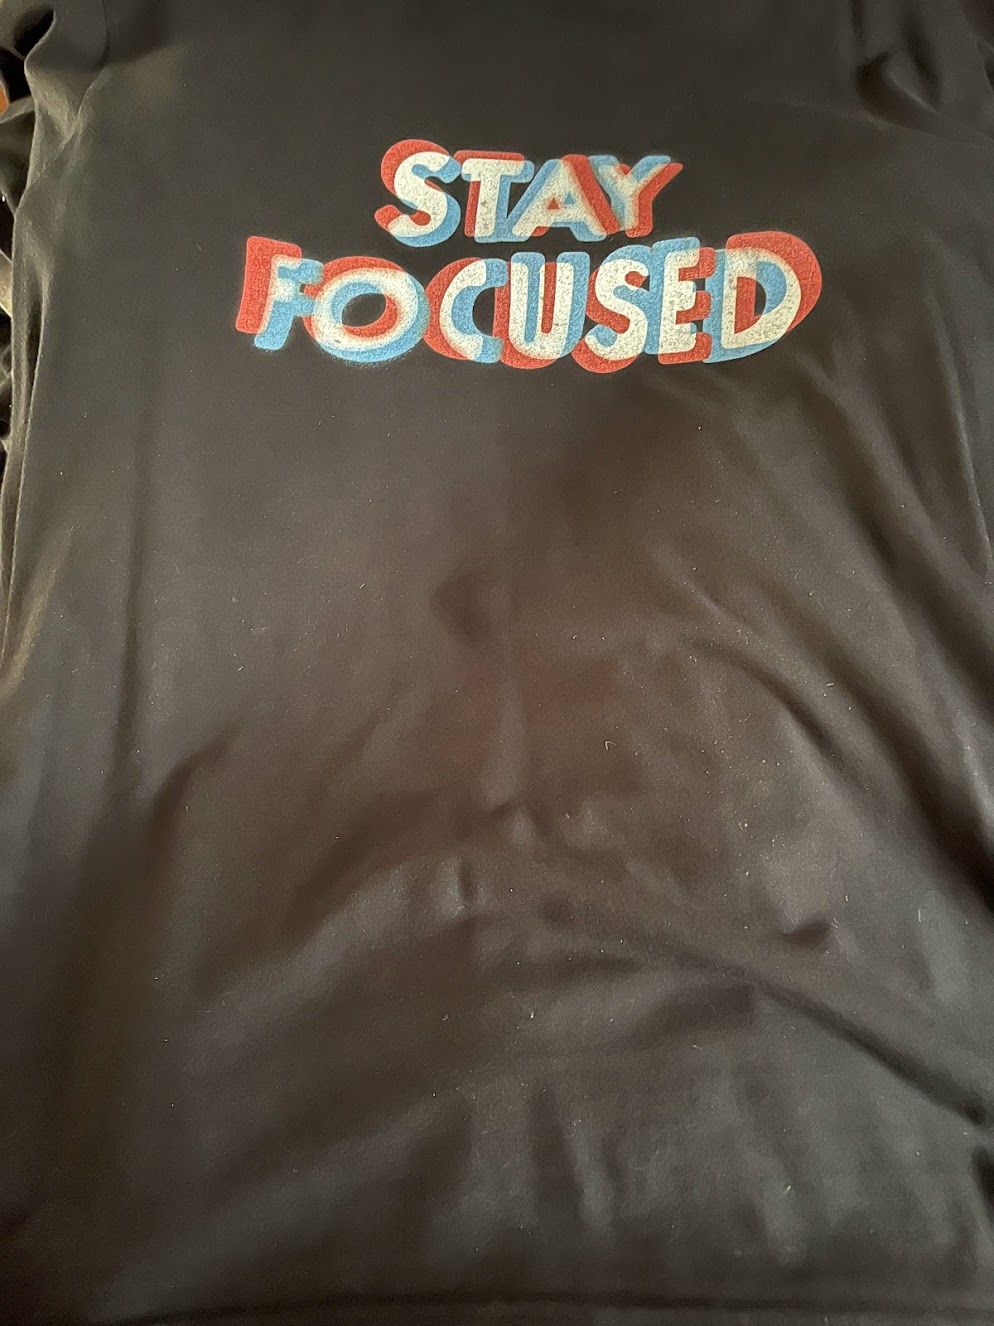 T-shirt saying 'Stay Focused' in out of focus text